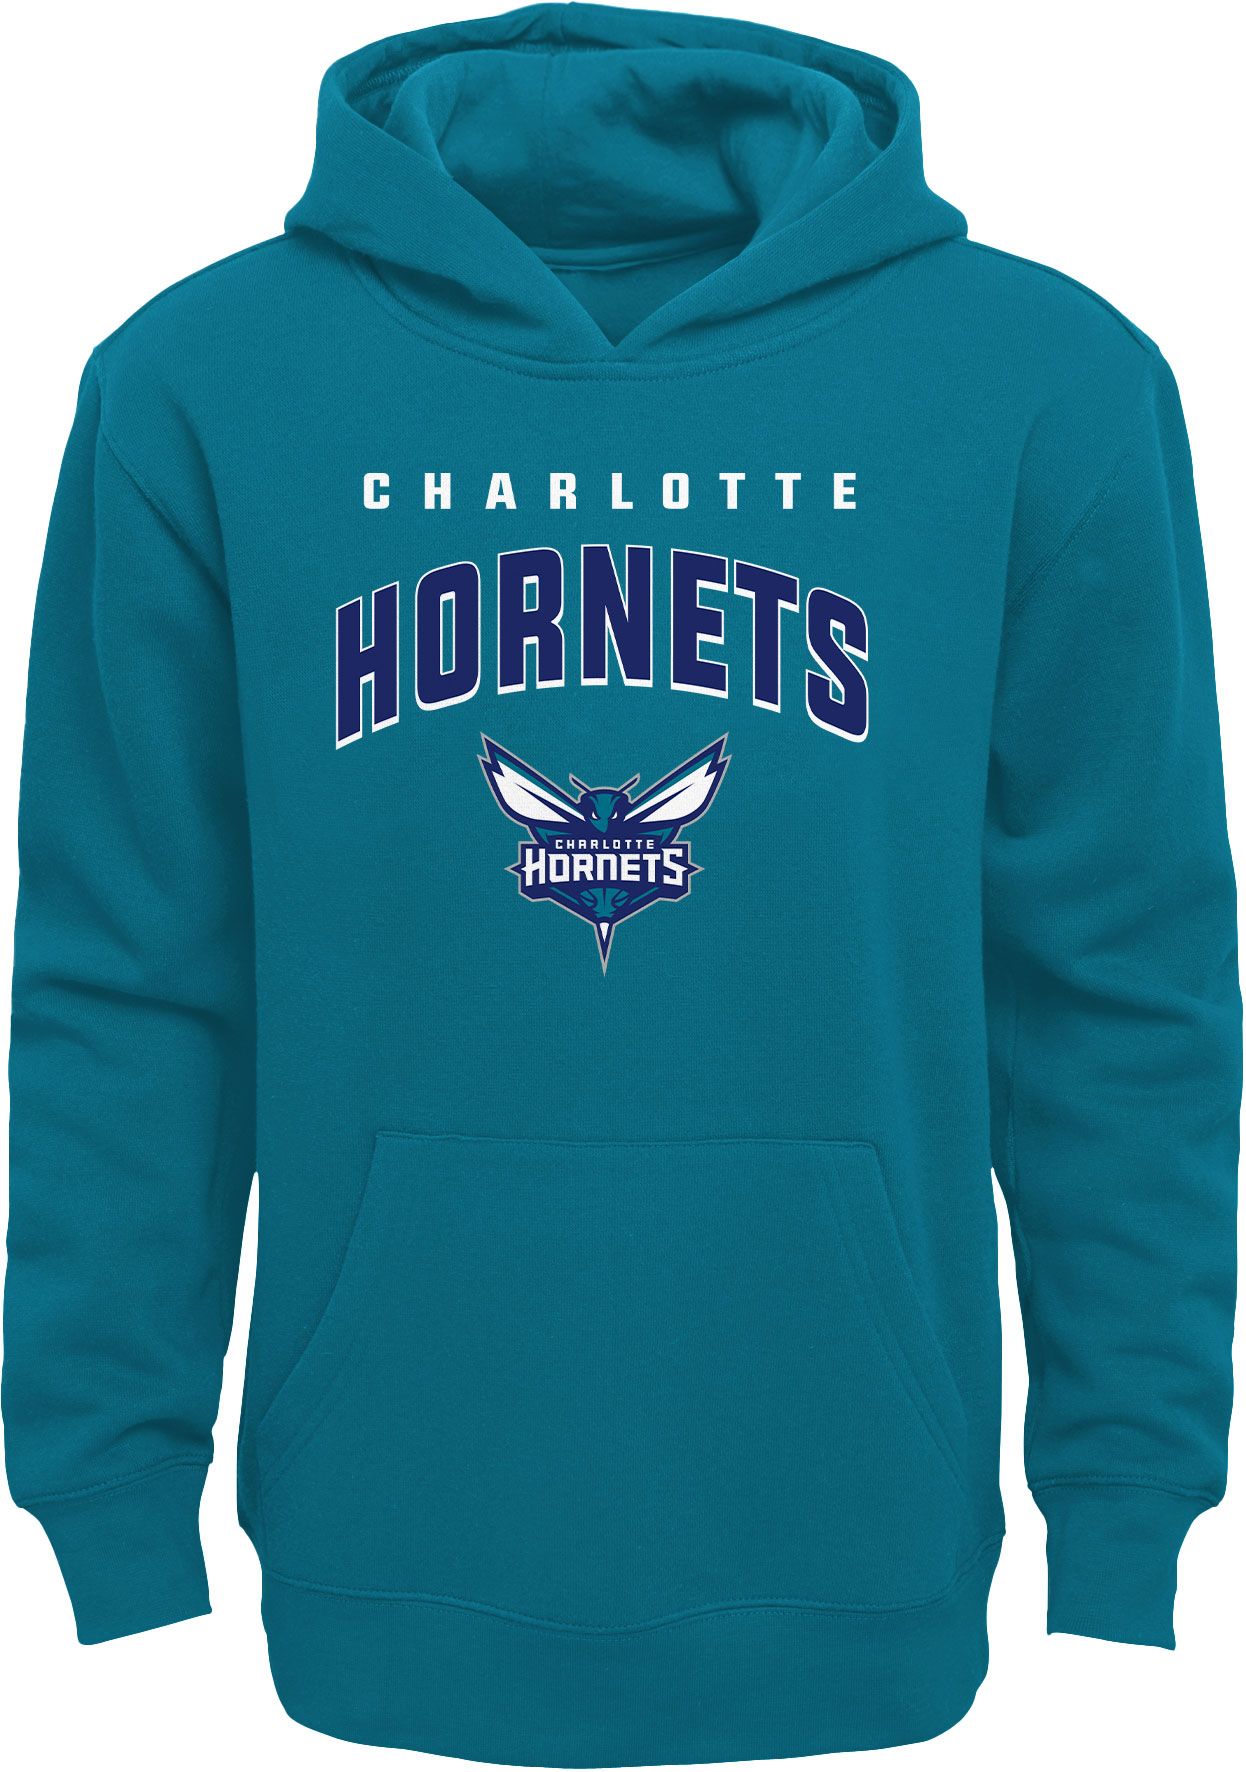 Outerstuff Youth Charlotte Hornets Stadium Pullover Teal Hoodie